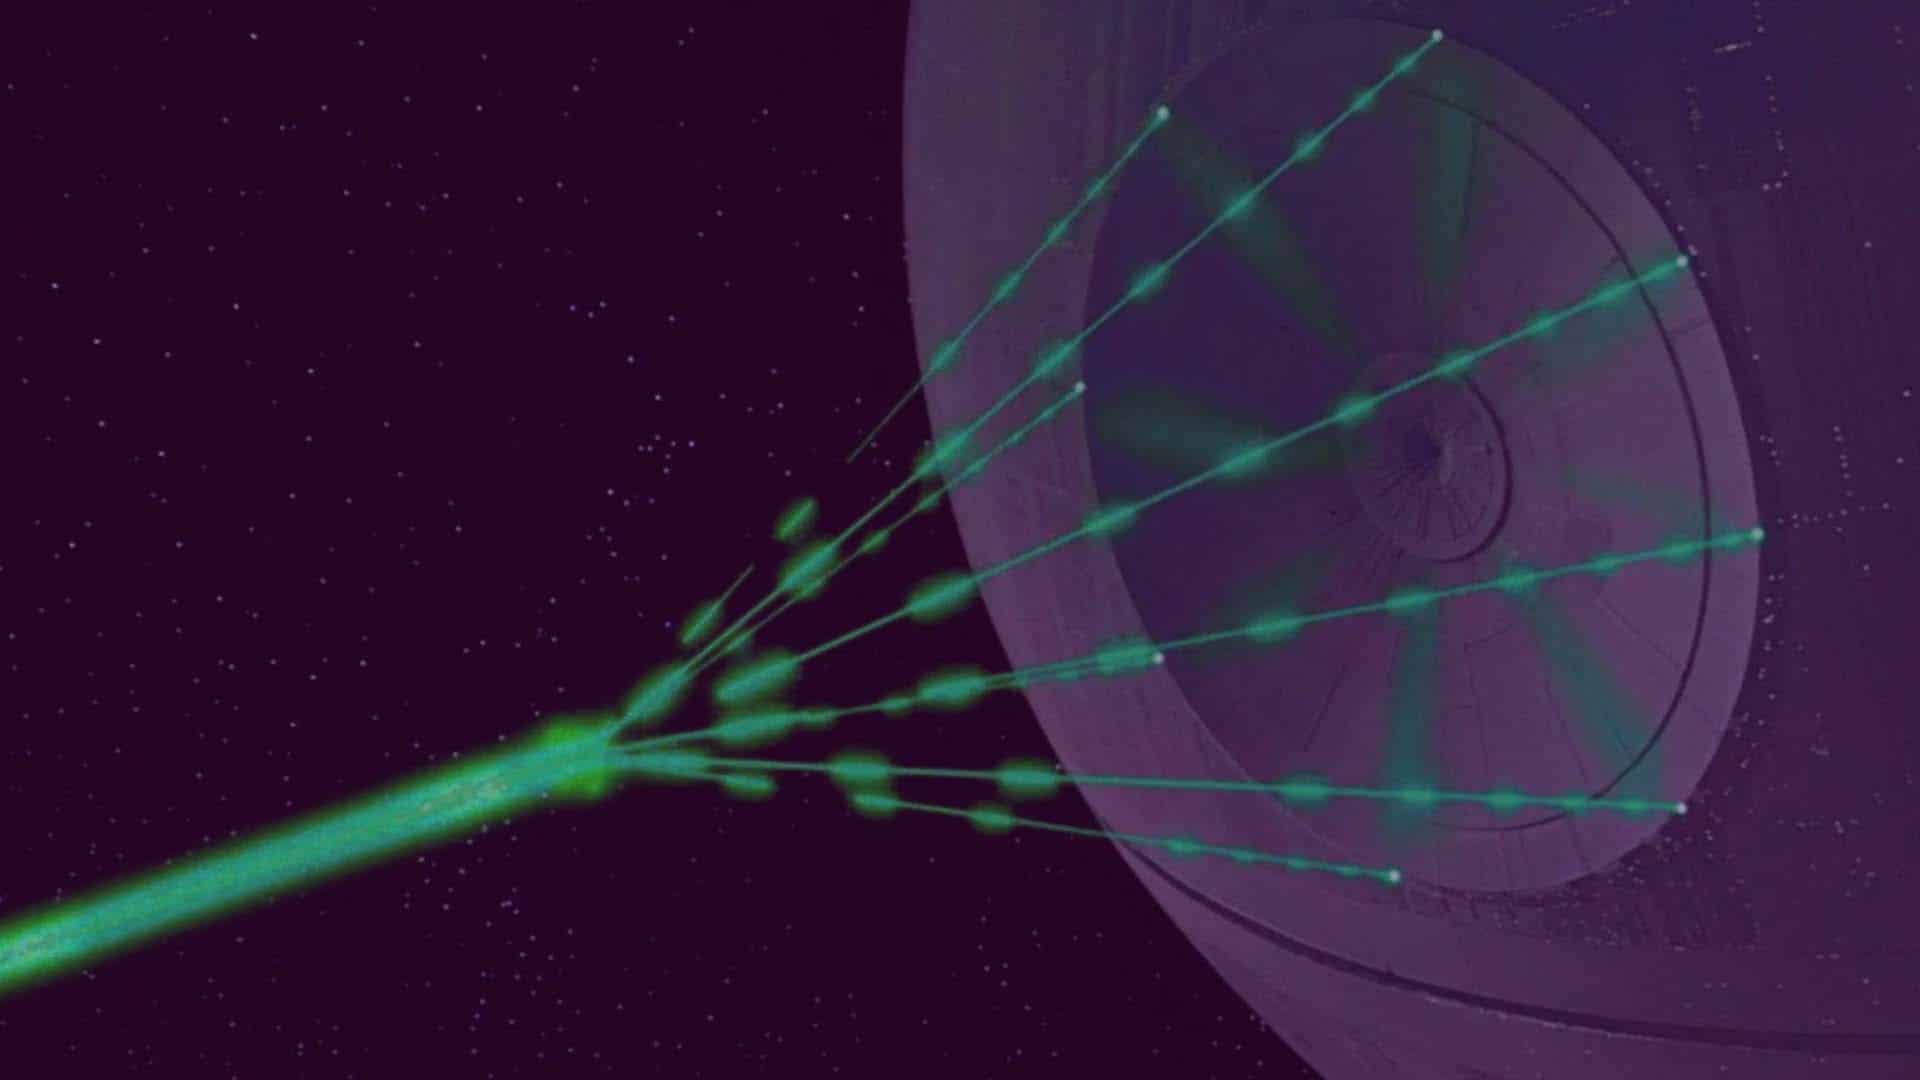 Parrott Talk-The Government Built The Death Star And They Use It To Make It "Rain"